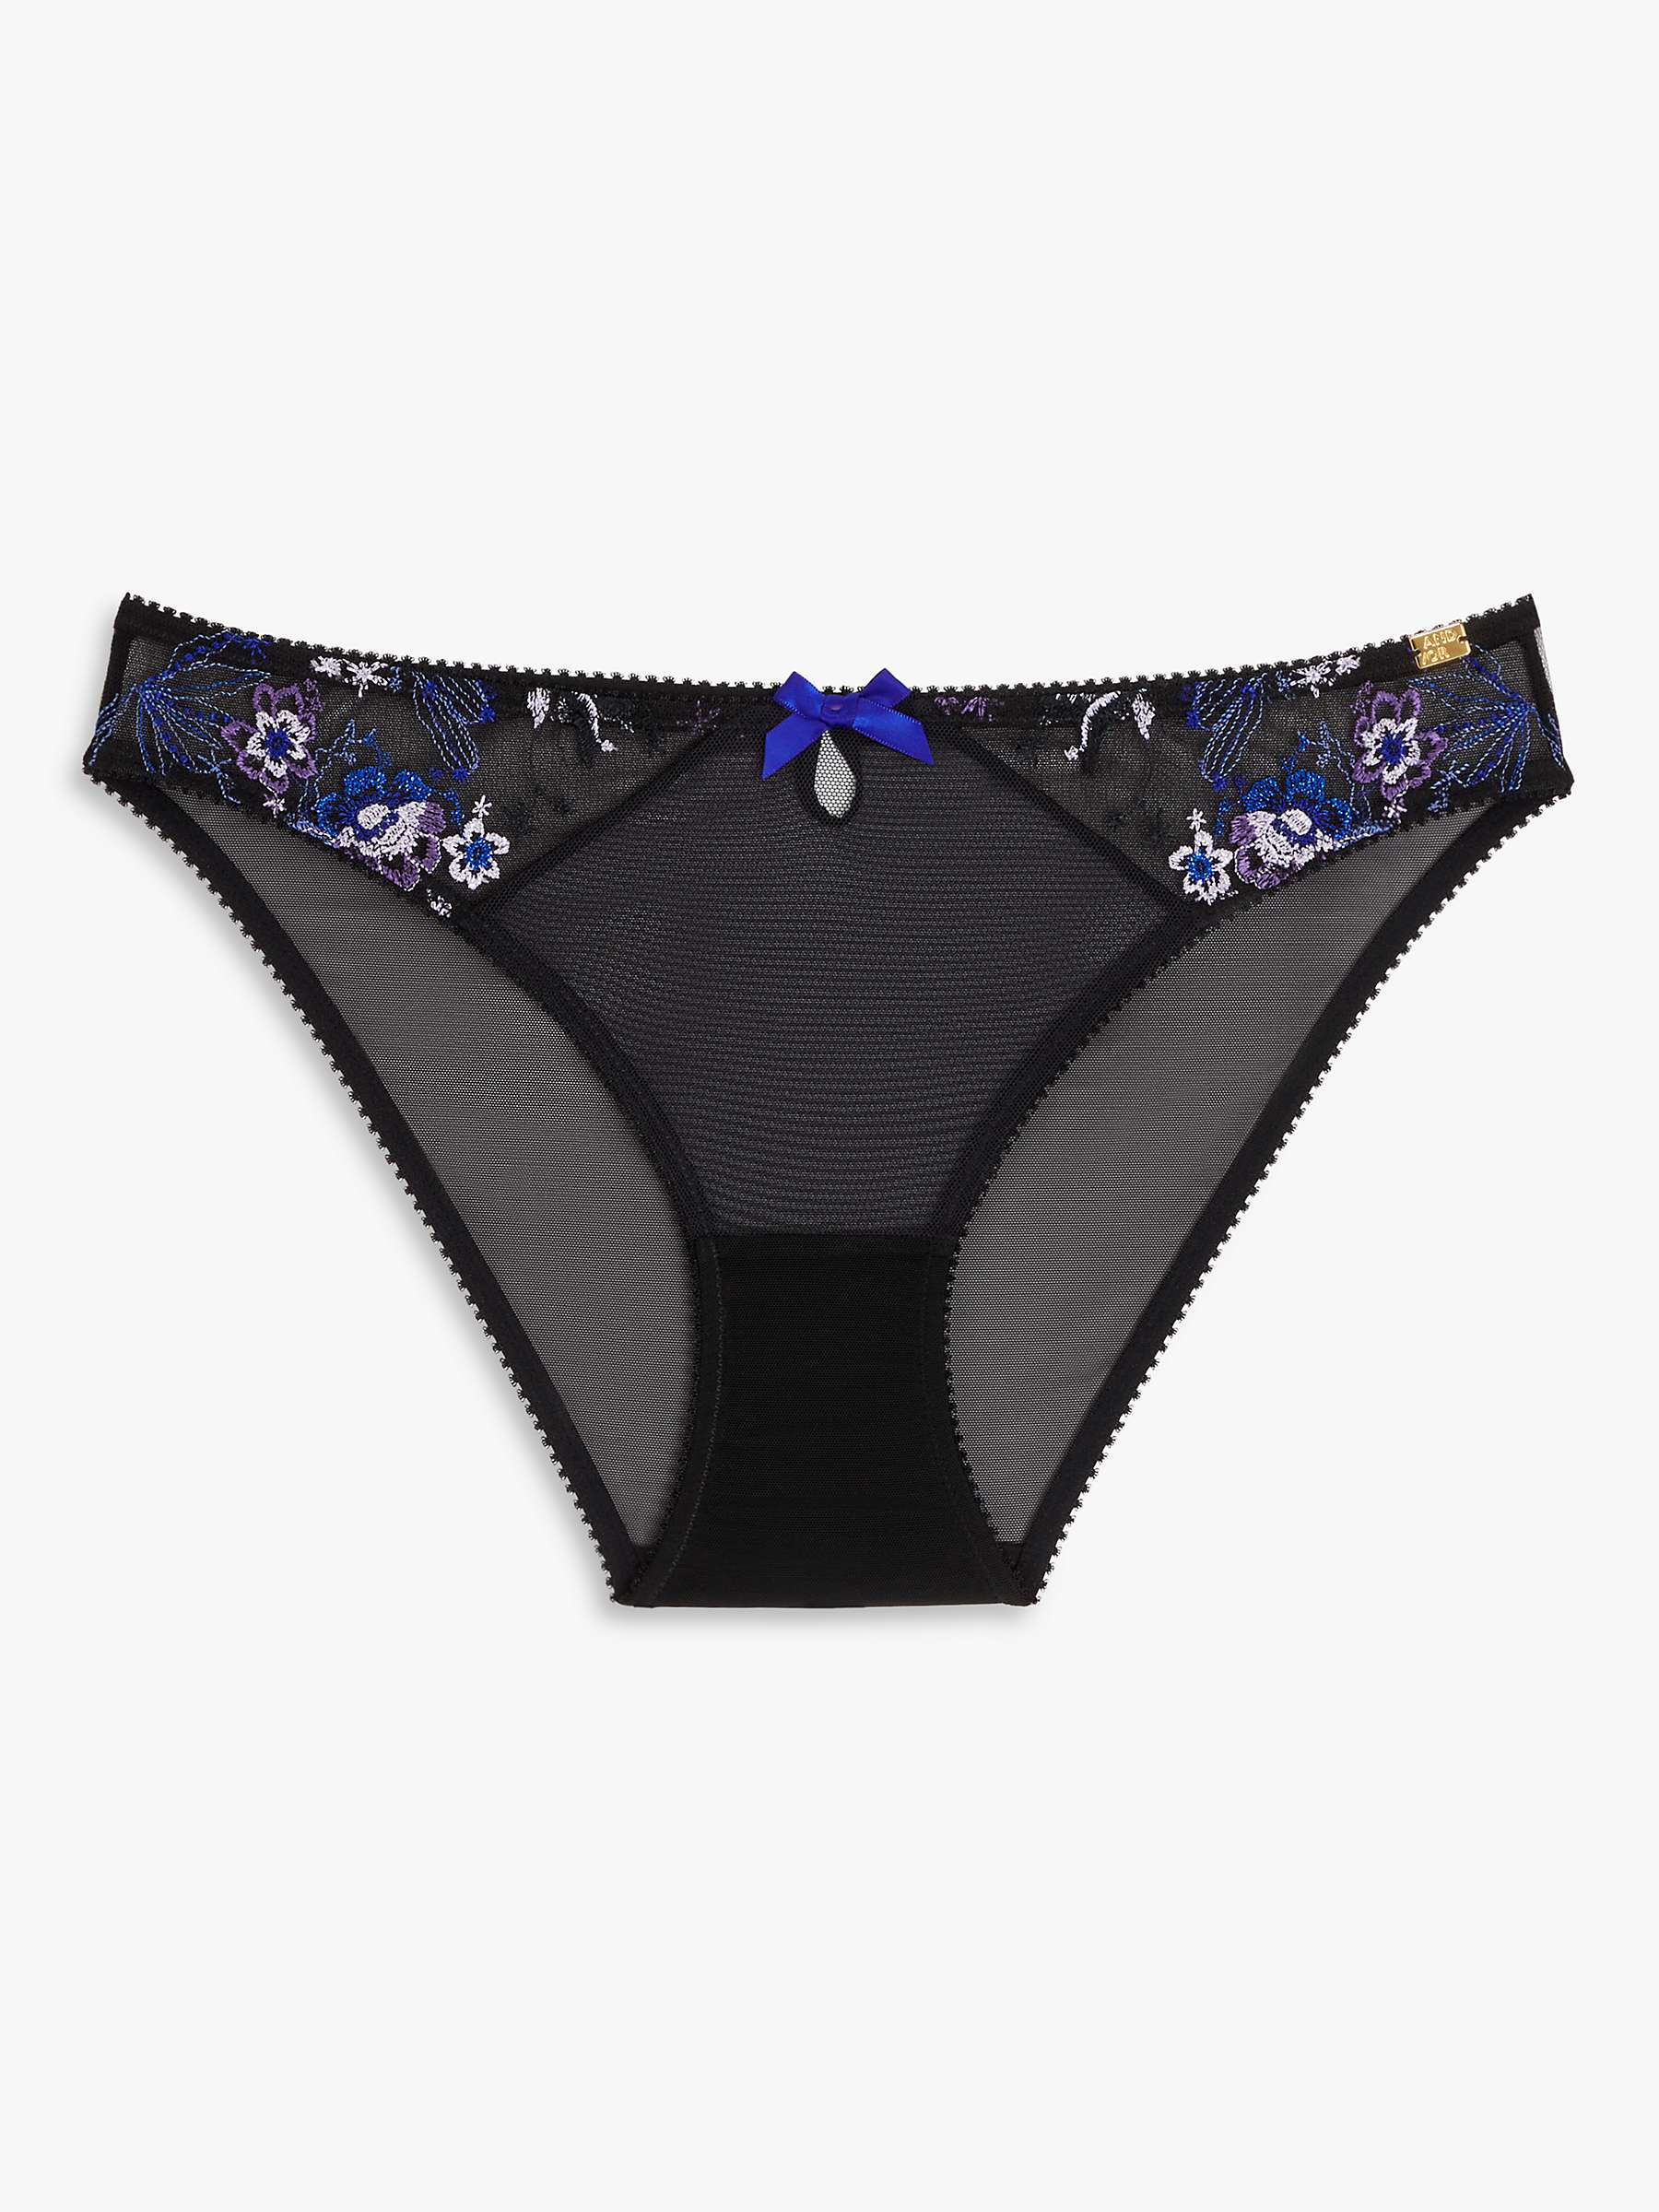 AND/OR Harper Desert Bird Embroidered Mesh Knickers, Black/Blue at John ...